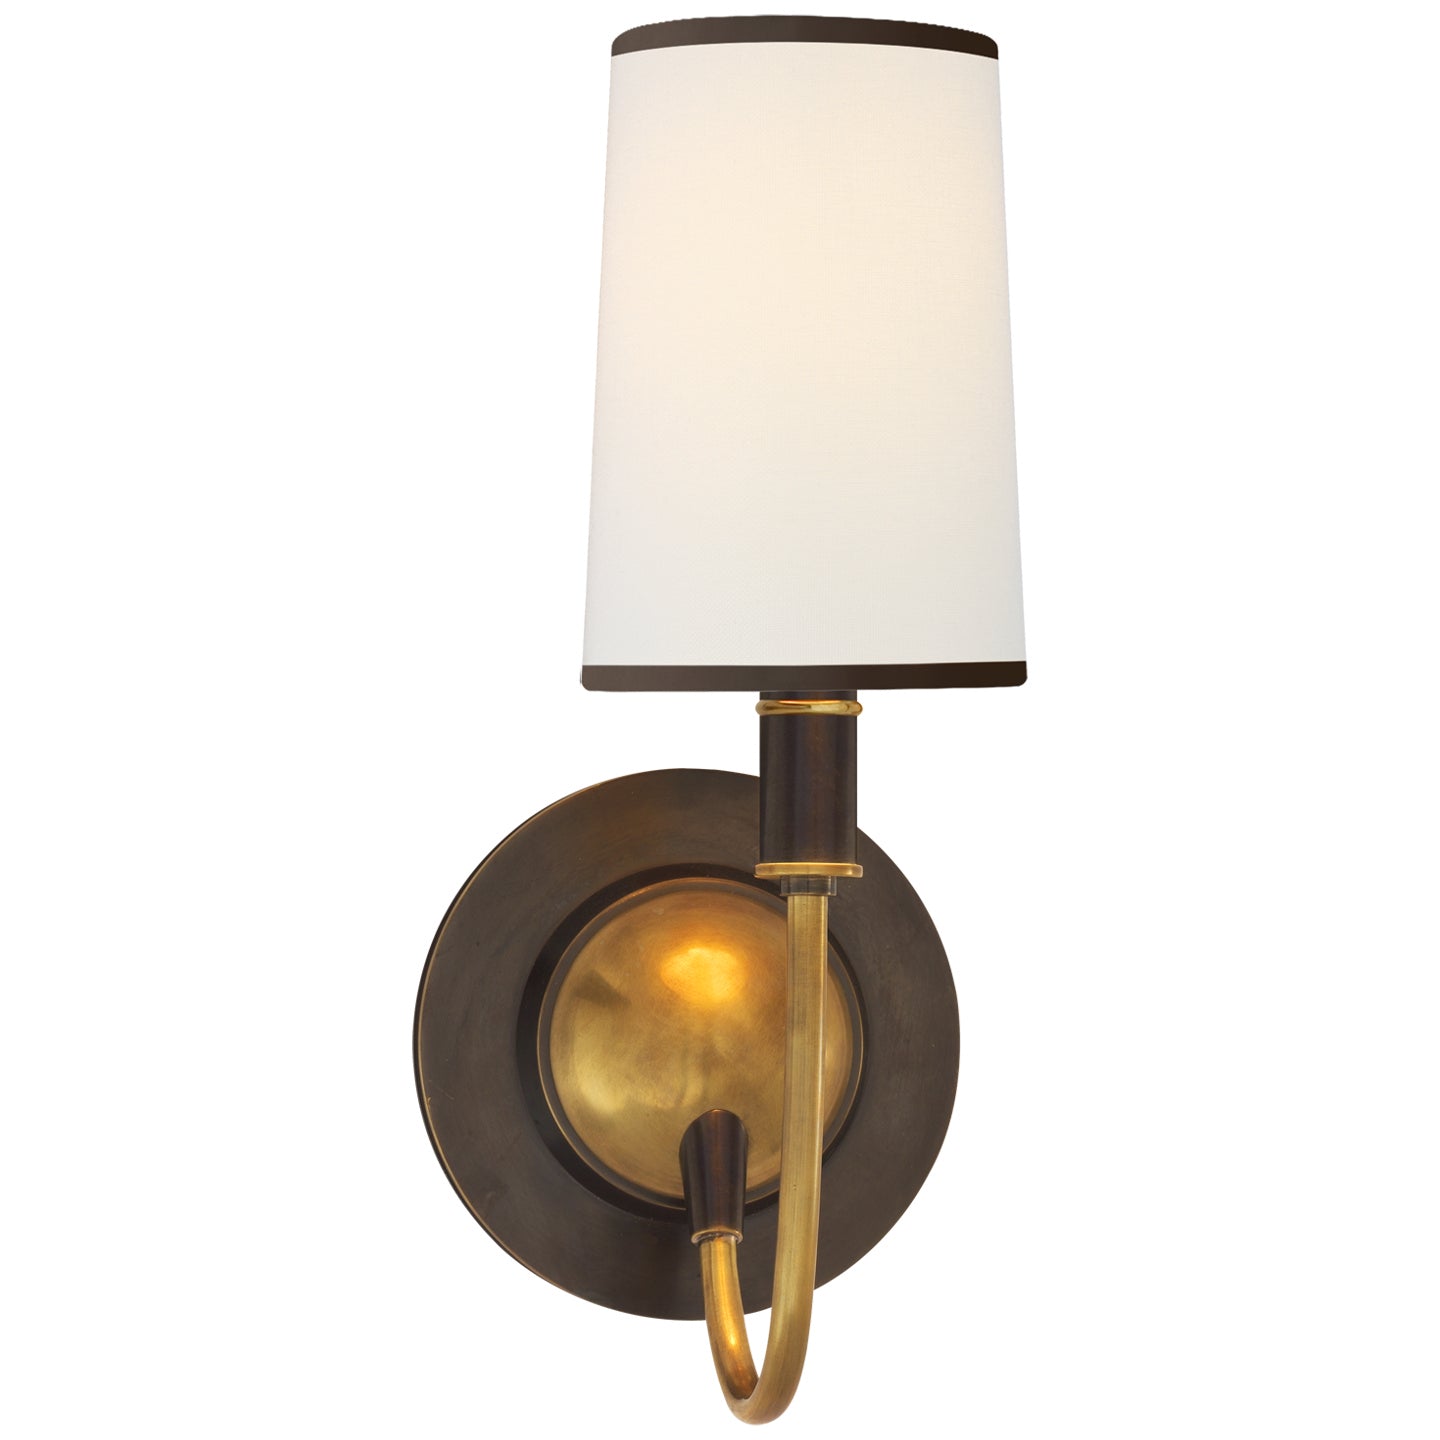 Visual Comfort Signature - TOB 2067BZ/HAB-L/BT - One Light Wall Sconce - Elkins - Bronze with Antique Brass